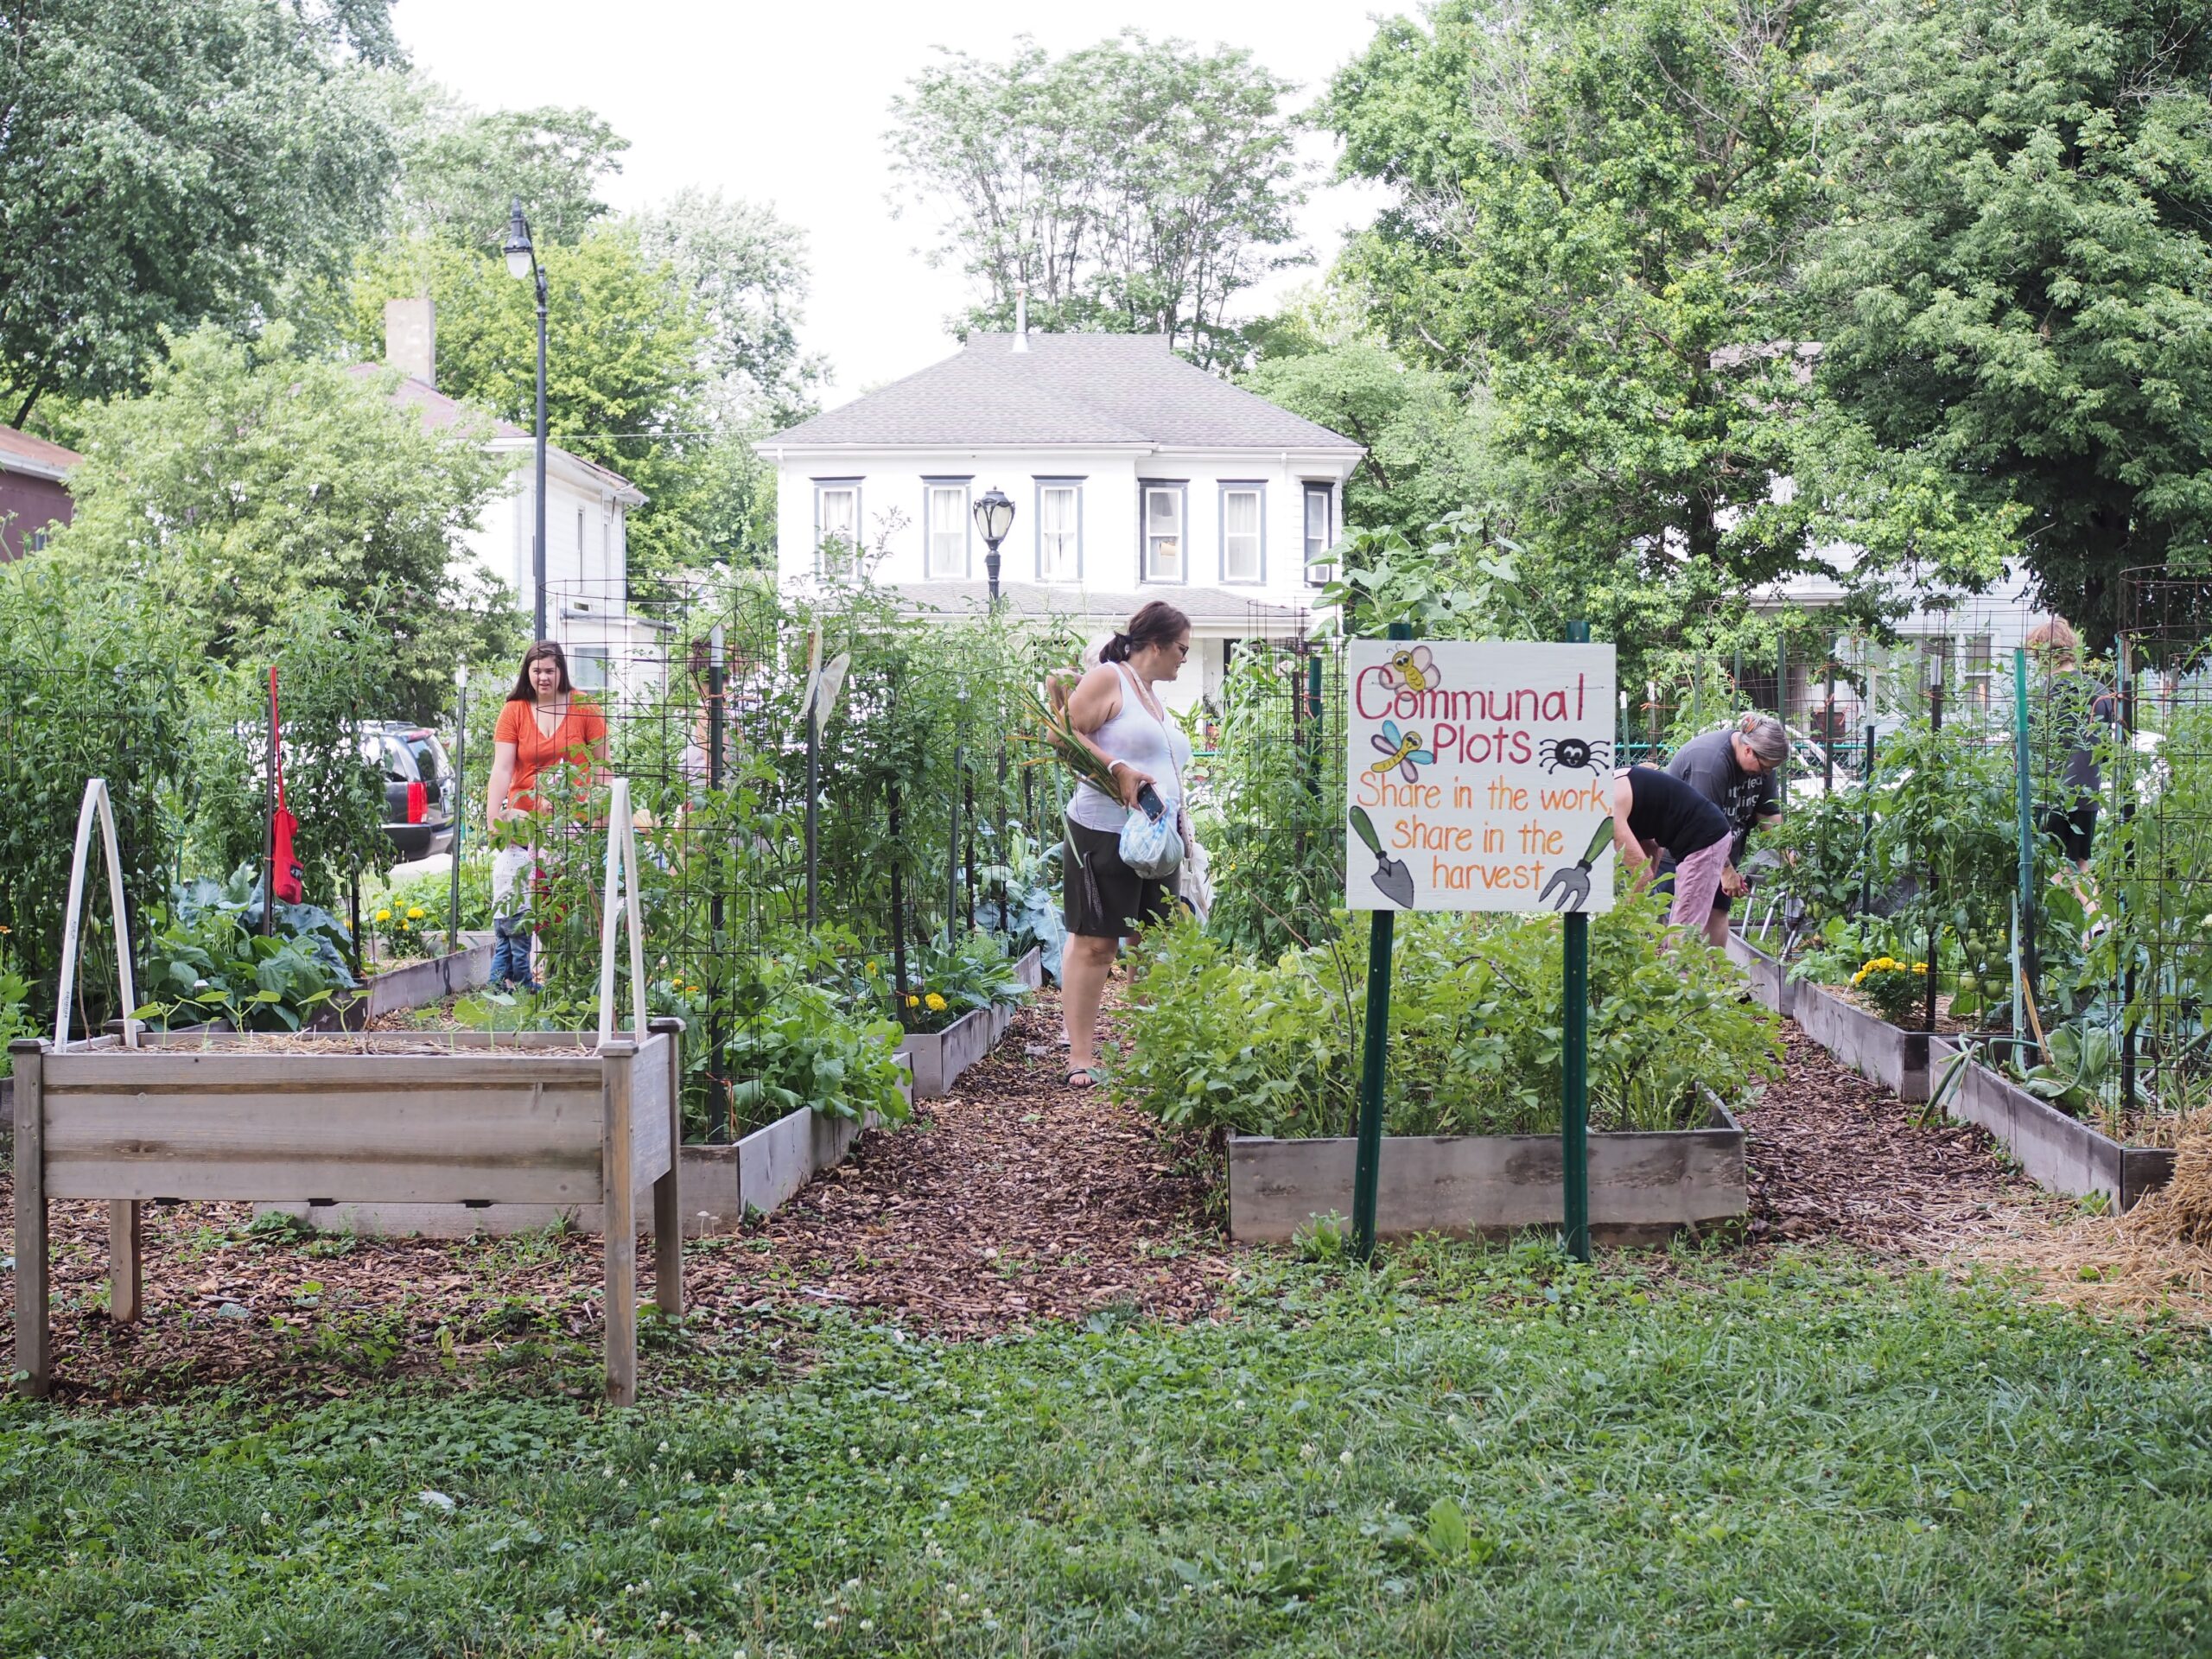 We garden together at Enos Park Neighborhood Gardens from 9 - 11 a.m. on Tuesdays, Thursday, and Saturdays from May through September.